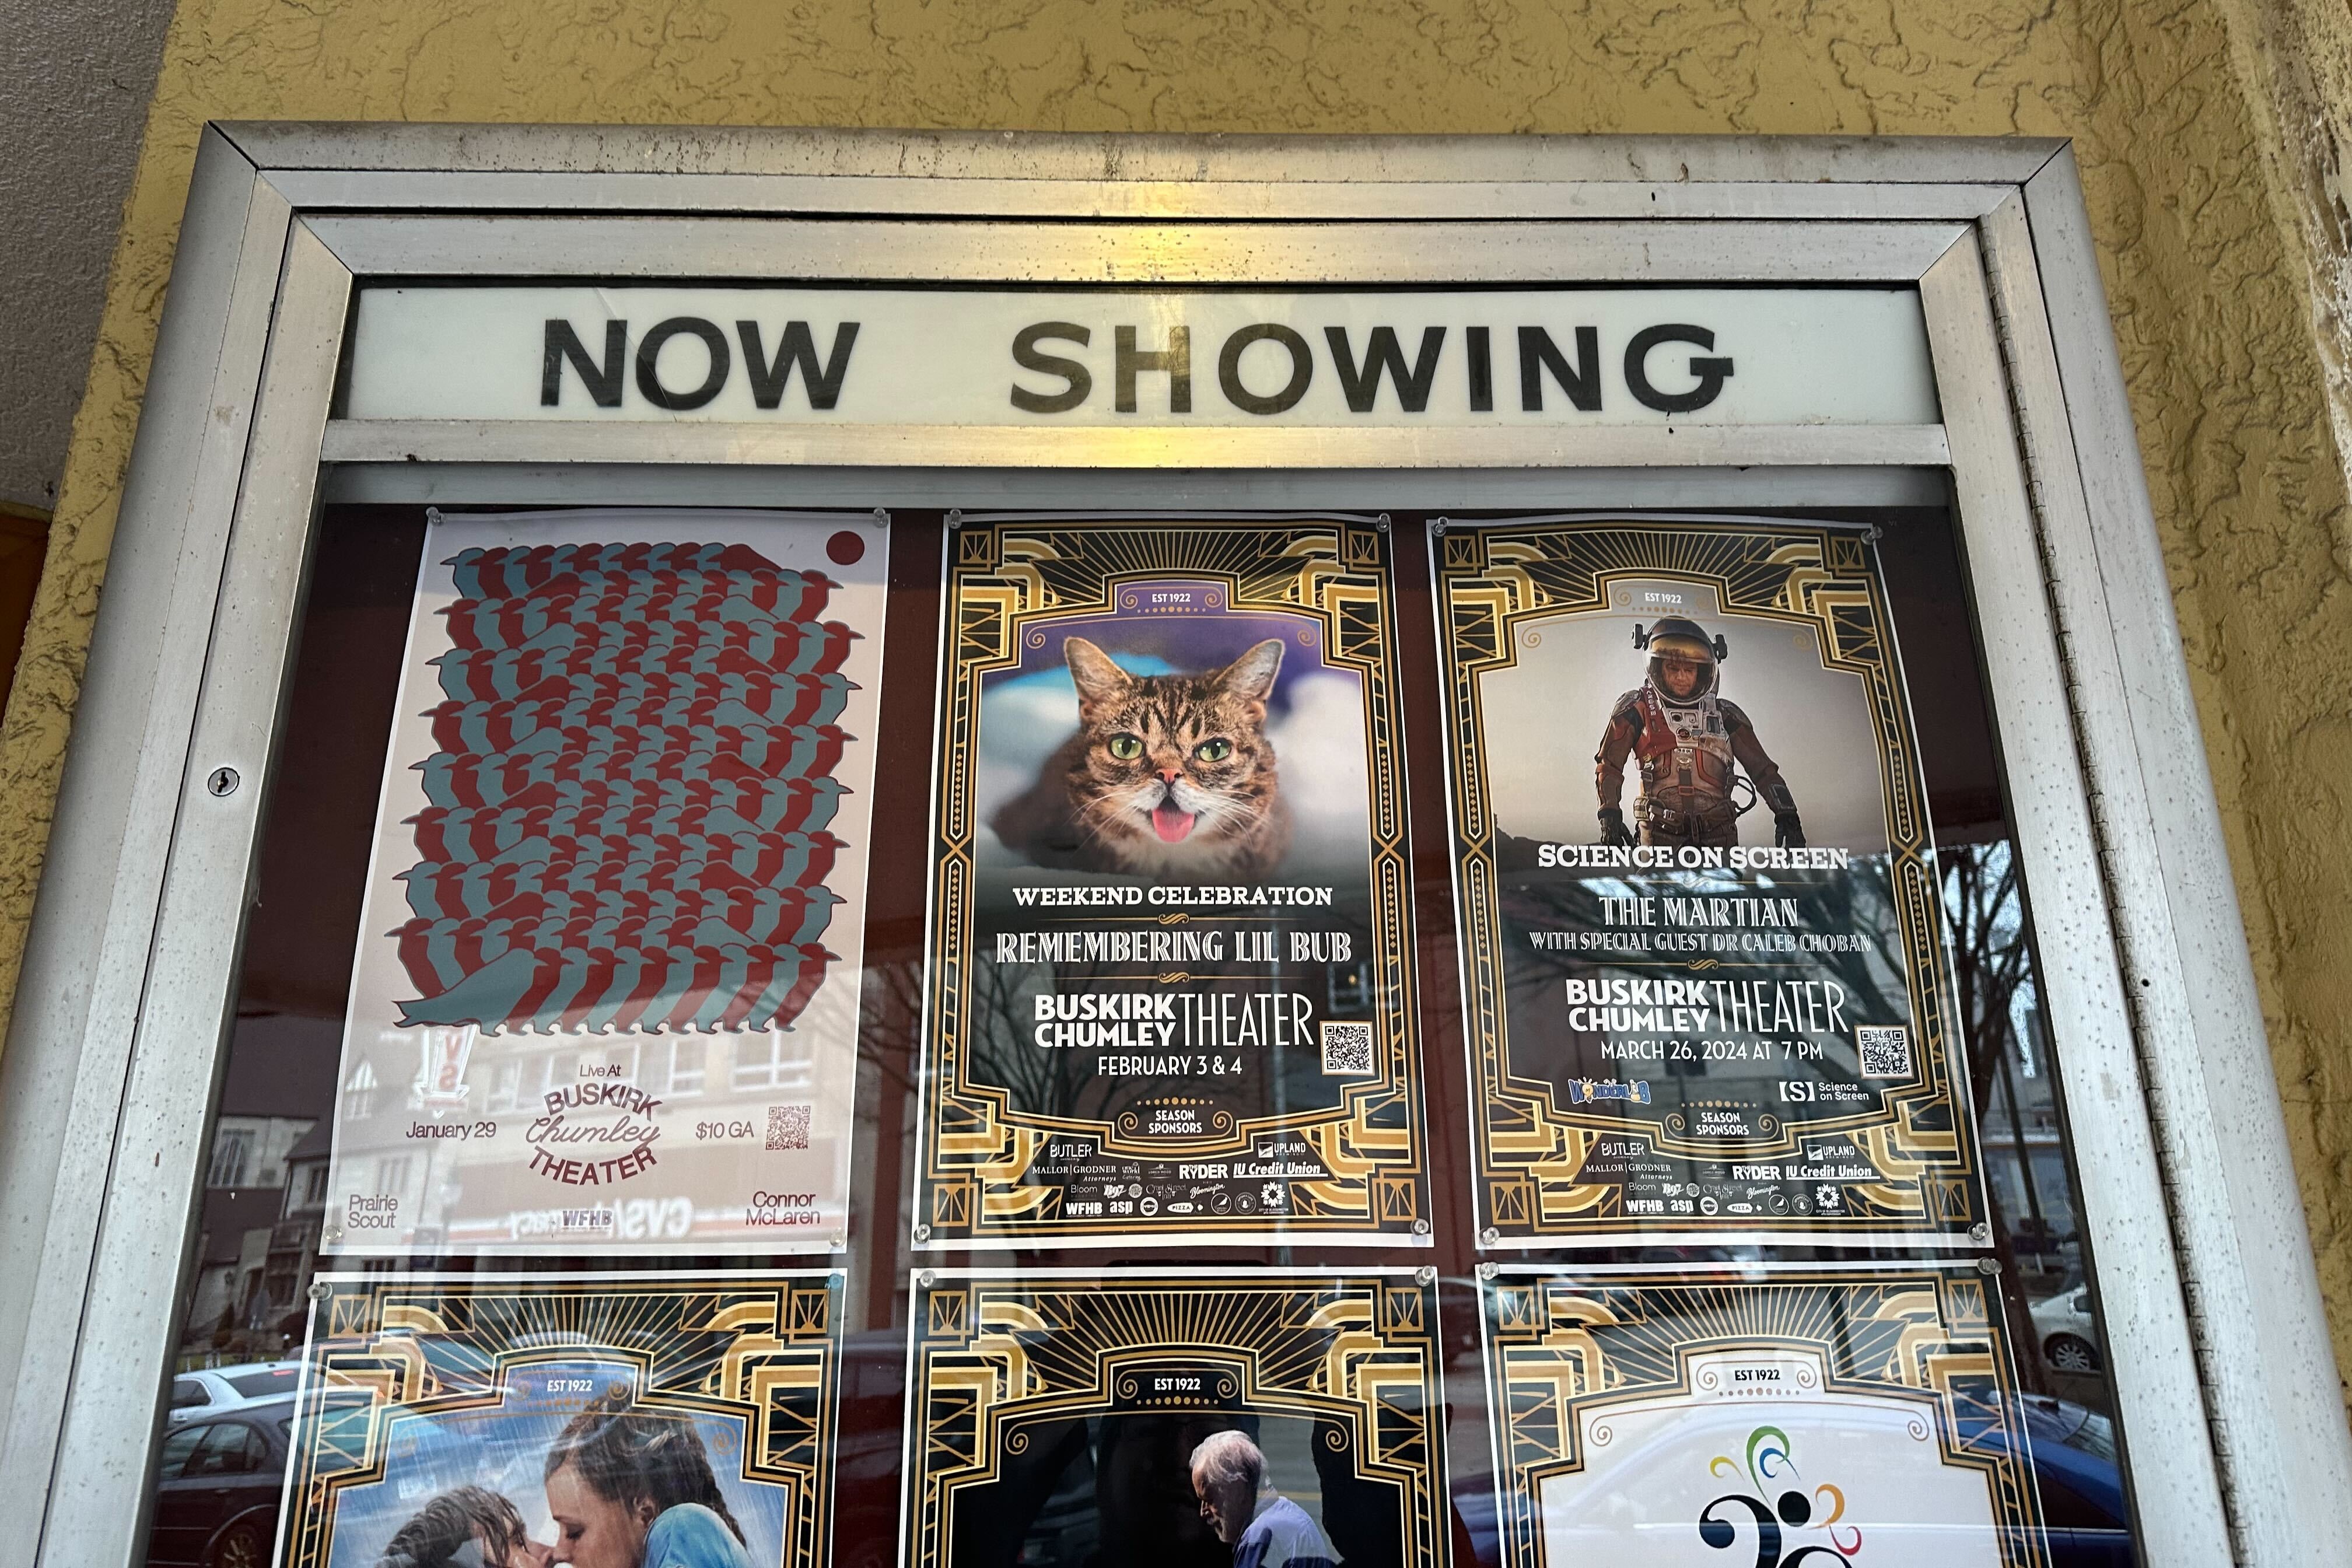 Poster of Lil Bub's event at the Buskirk-Chumley theater